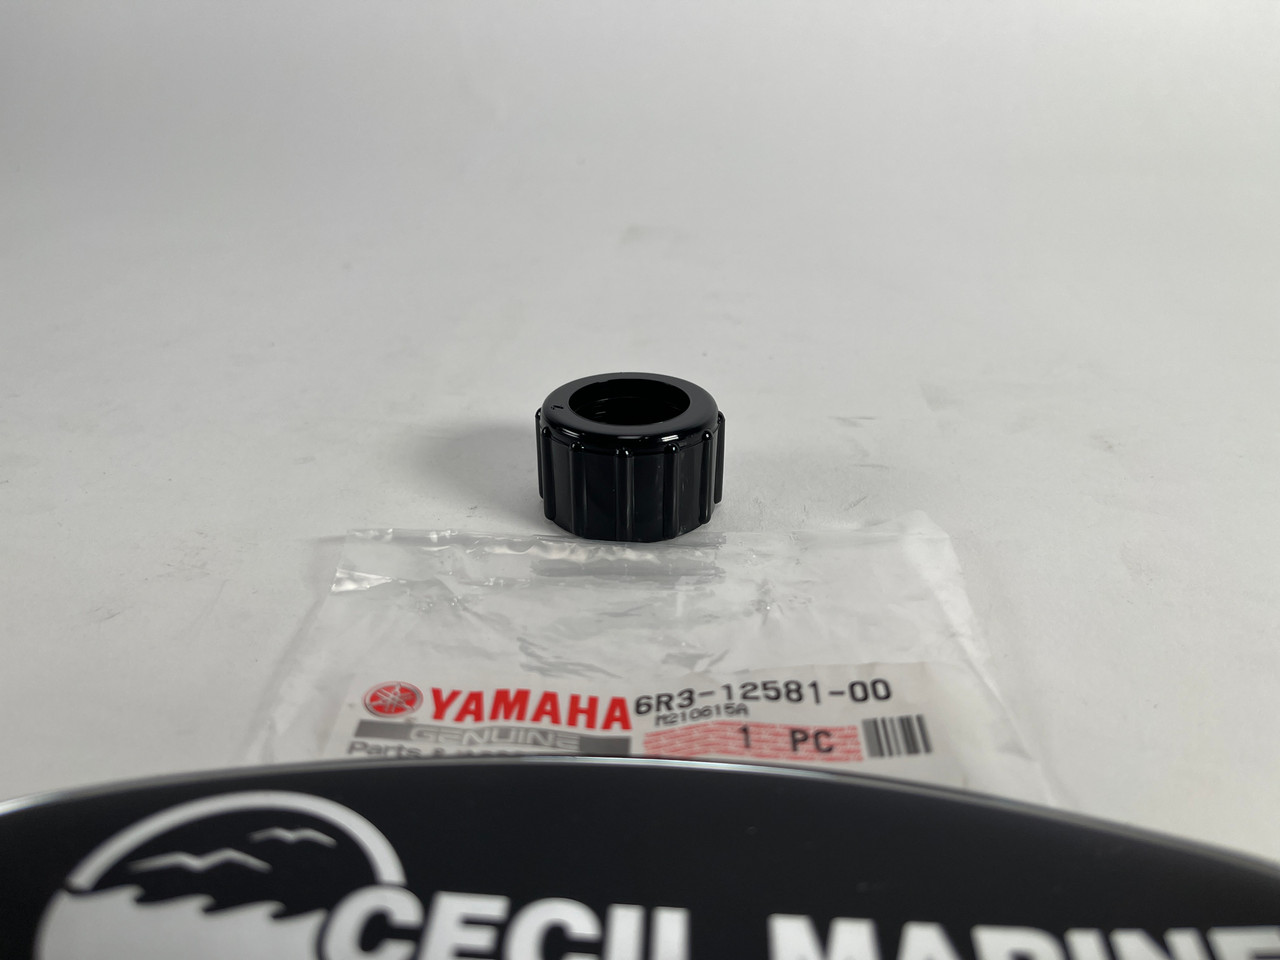 $5.99* GENUINE YAMAHA no tax* JOINT,HOSE 1 6R3-12581-00-00 *In Stock & Ready To Ship